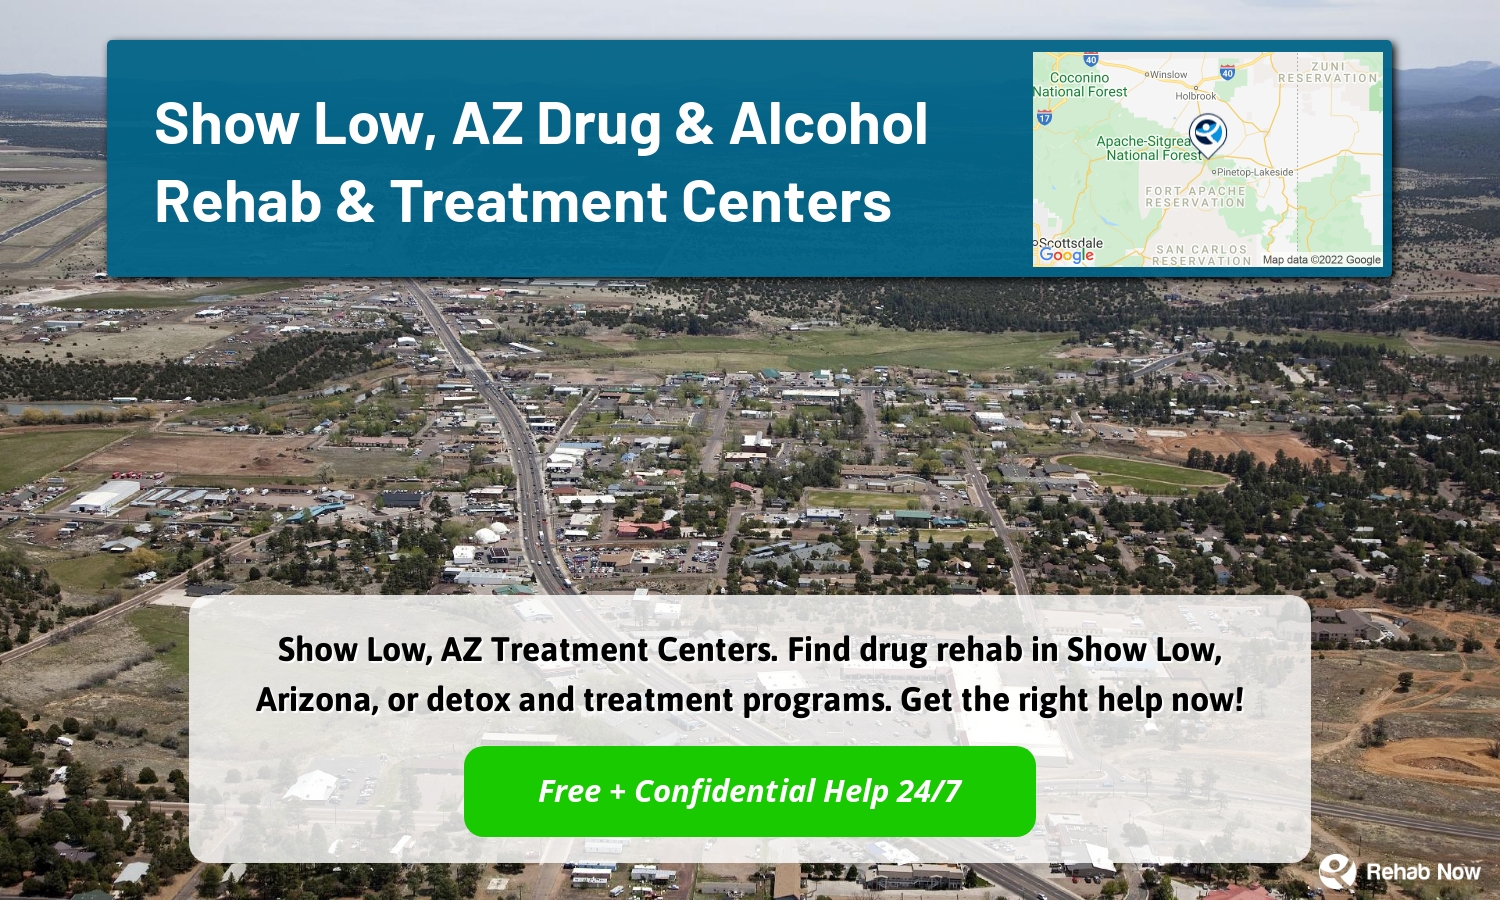 Show Low, AZ Treatment Centers. Find drug rehab in Show Low, Arizona, or detox and treatment programs. Get the right help now!